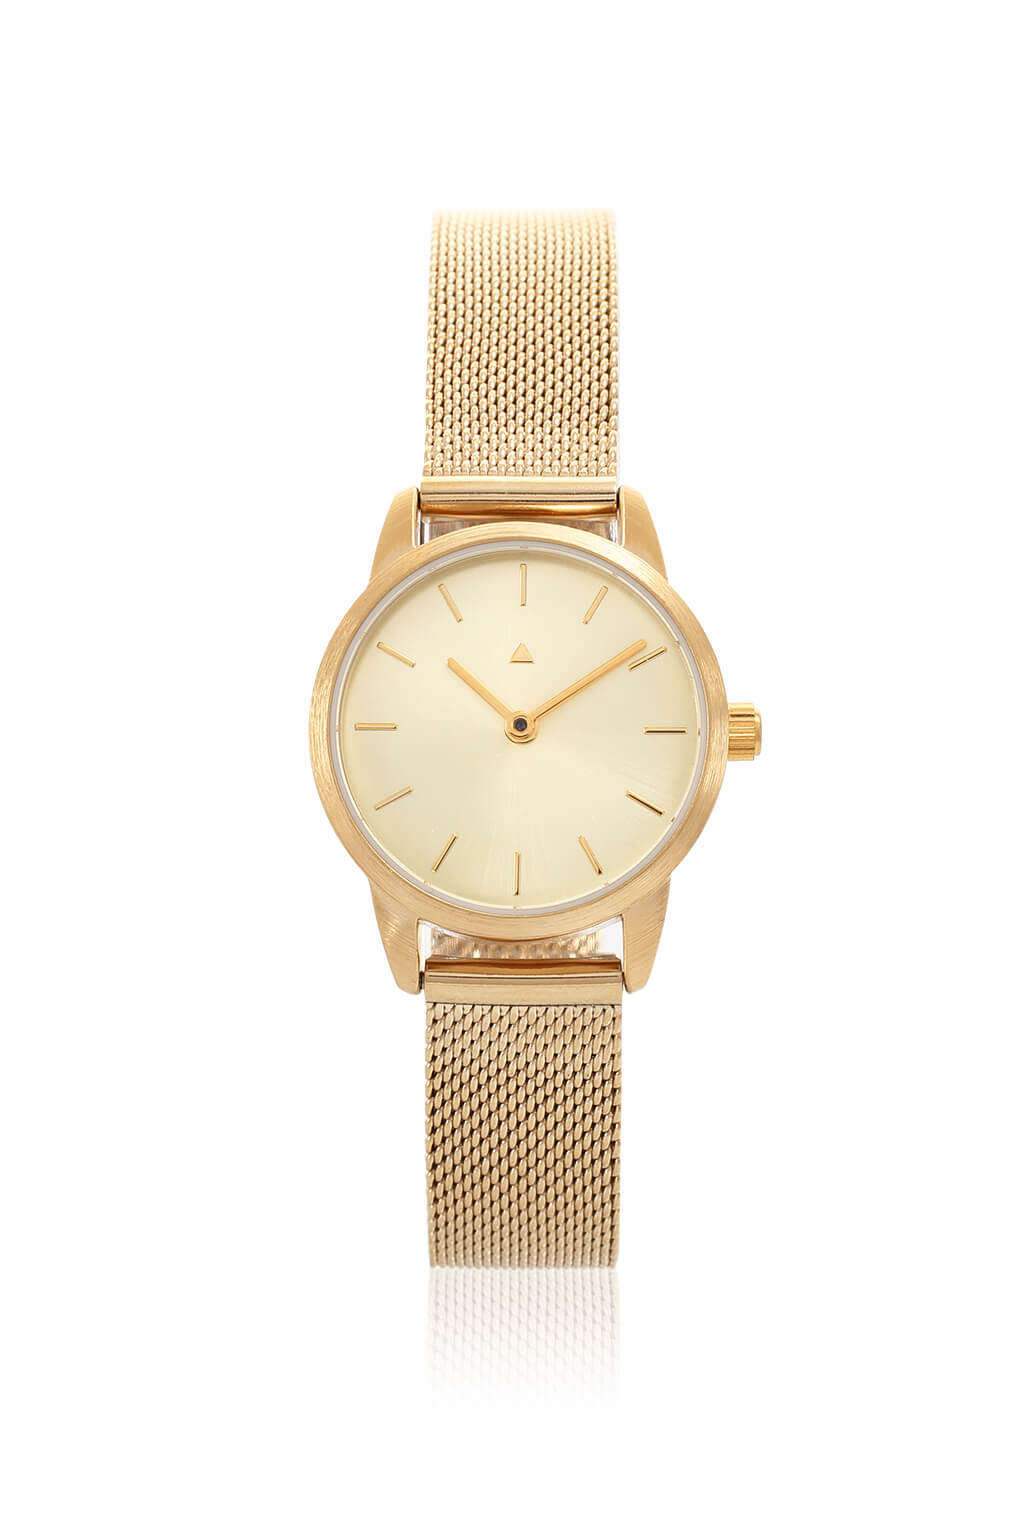 25 mm watch with a golden mesh strap